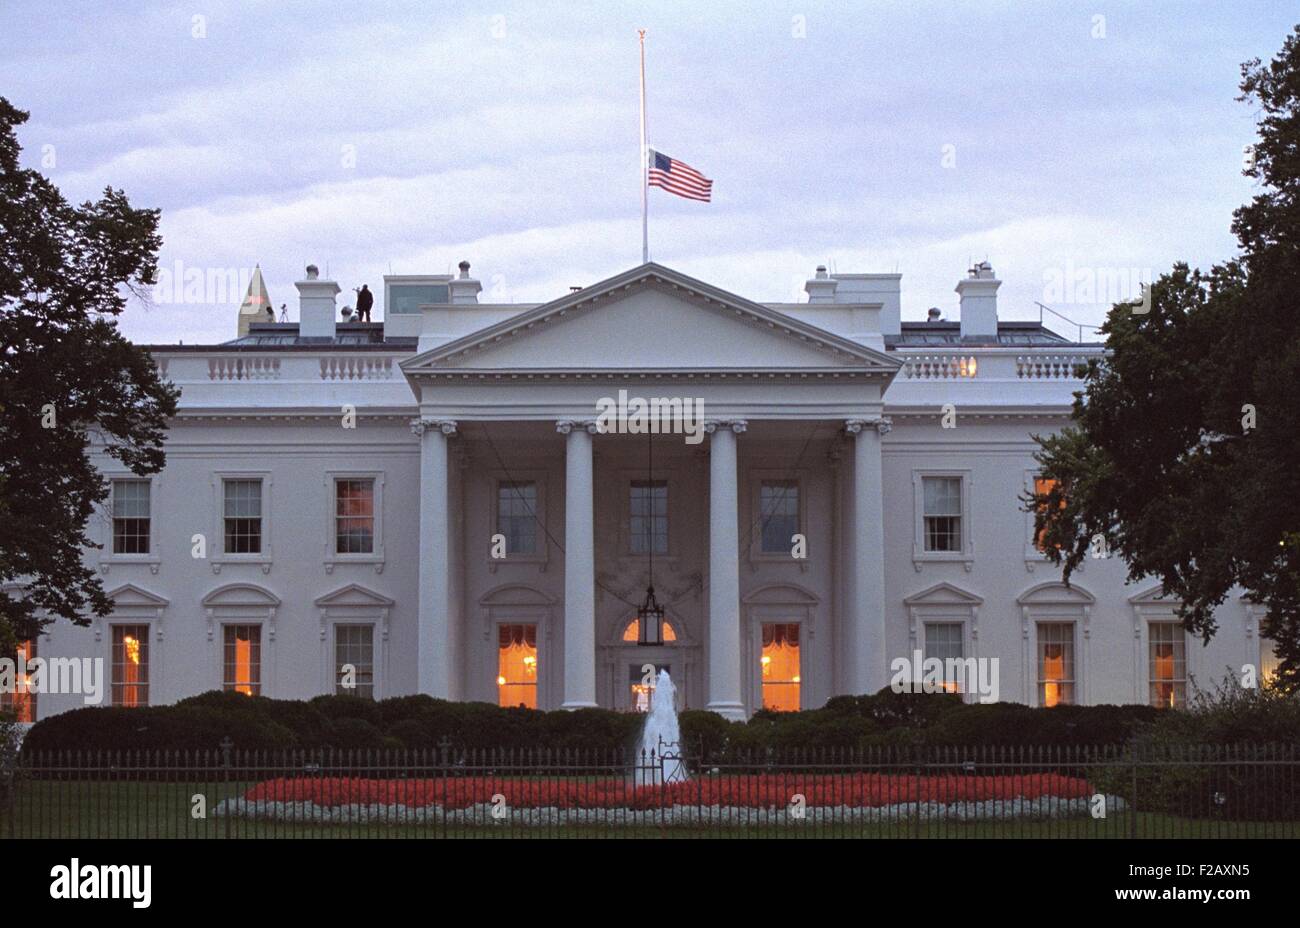 American flag flies at half-staff over the White House at sunrise Friday, Sept. 14, 2001. 3 days following the 9-11 Terrorist Attacks, counter assault team members are posted on the roof. (BSLOC 2015 2 148) Stock Photo